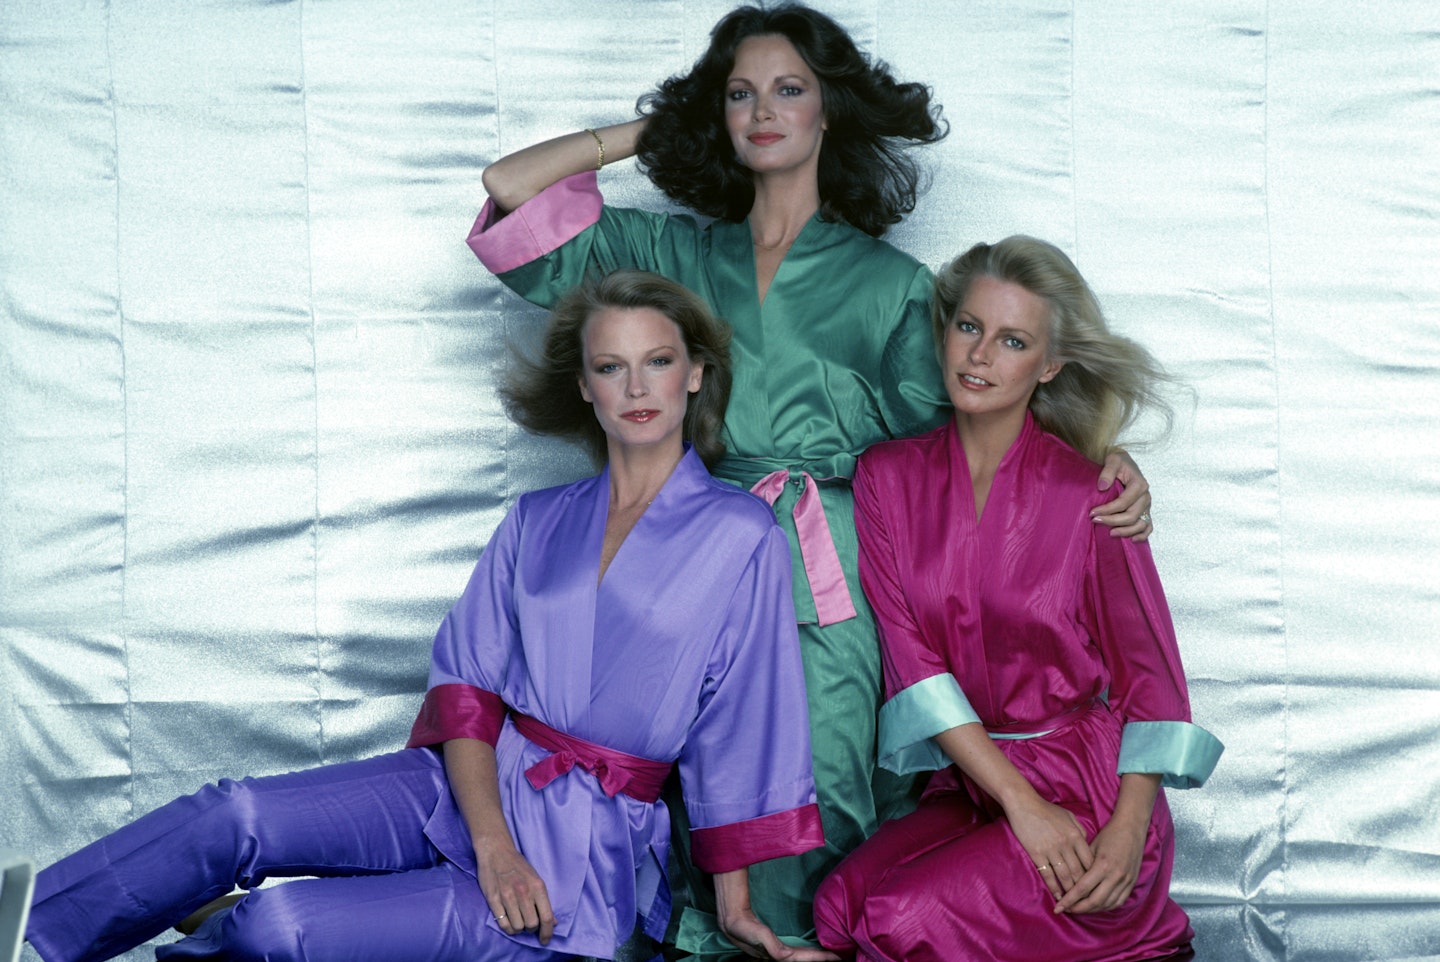 Style tips from the original Charlie's Angels